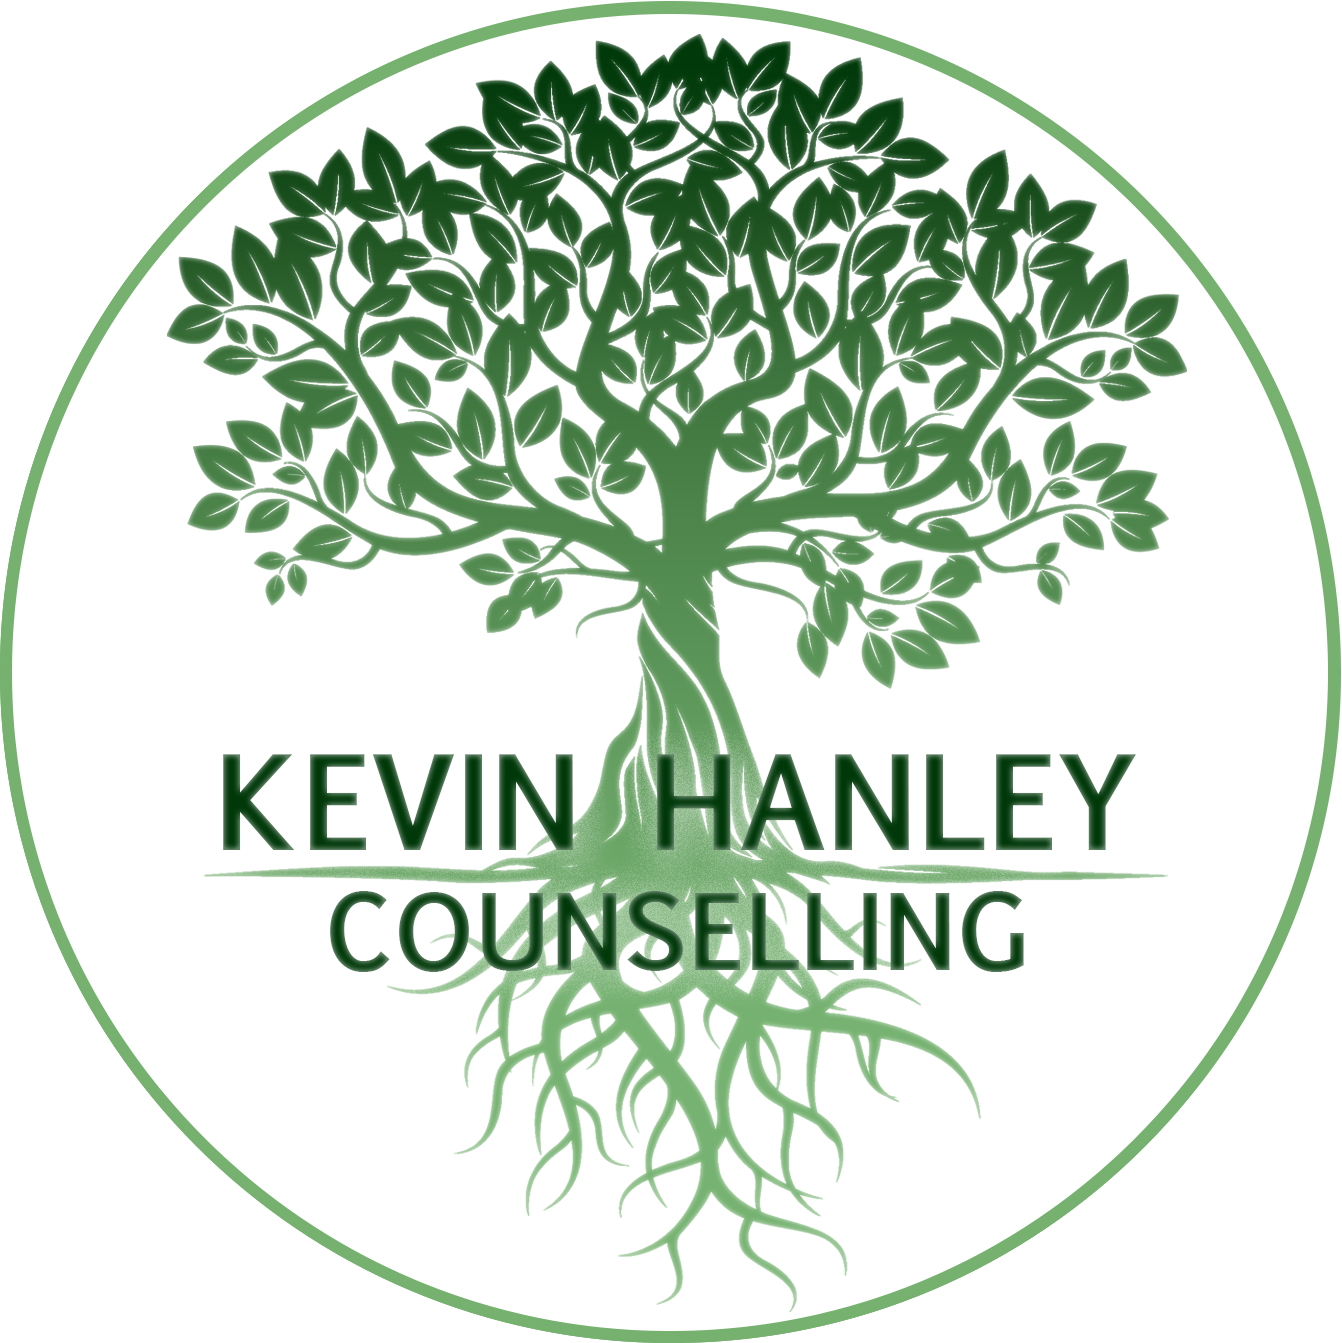 Kevin Hanley Counselling